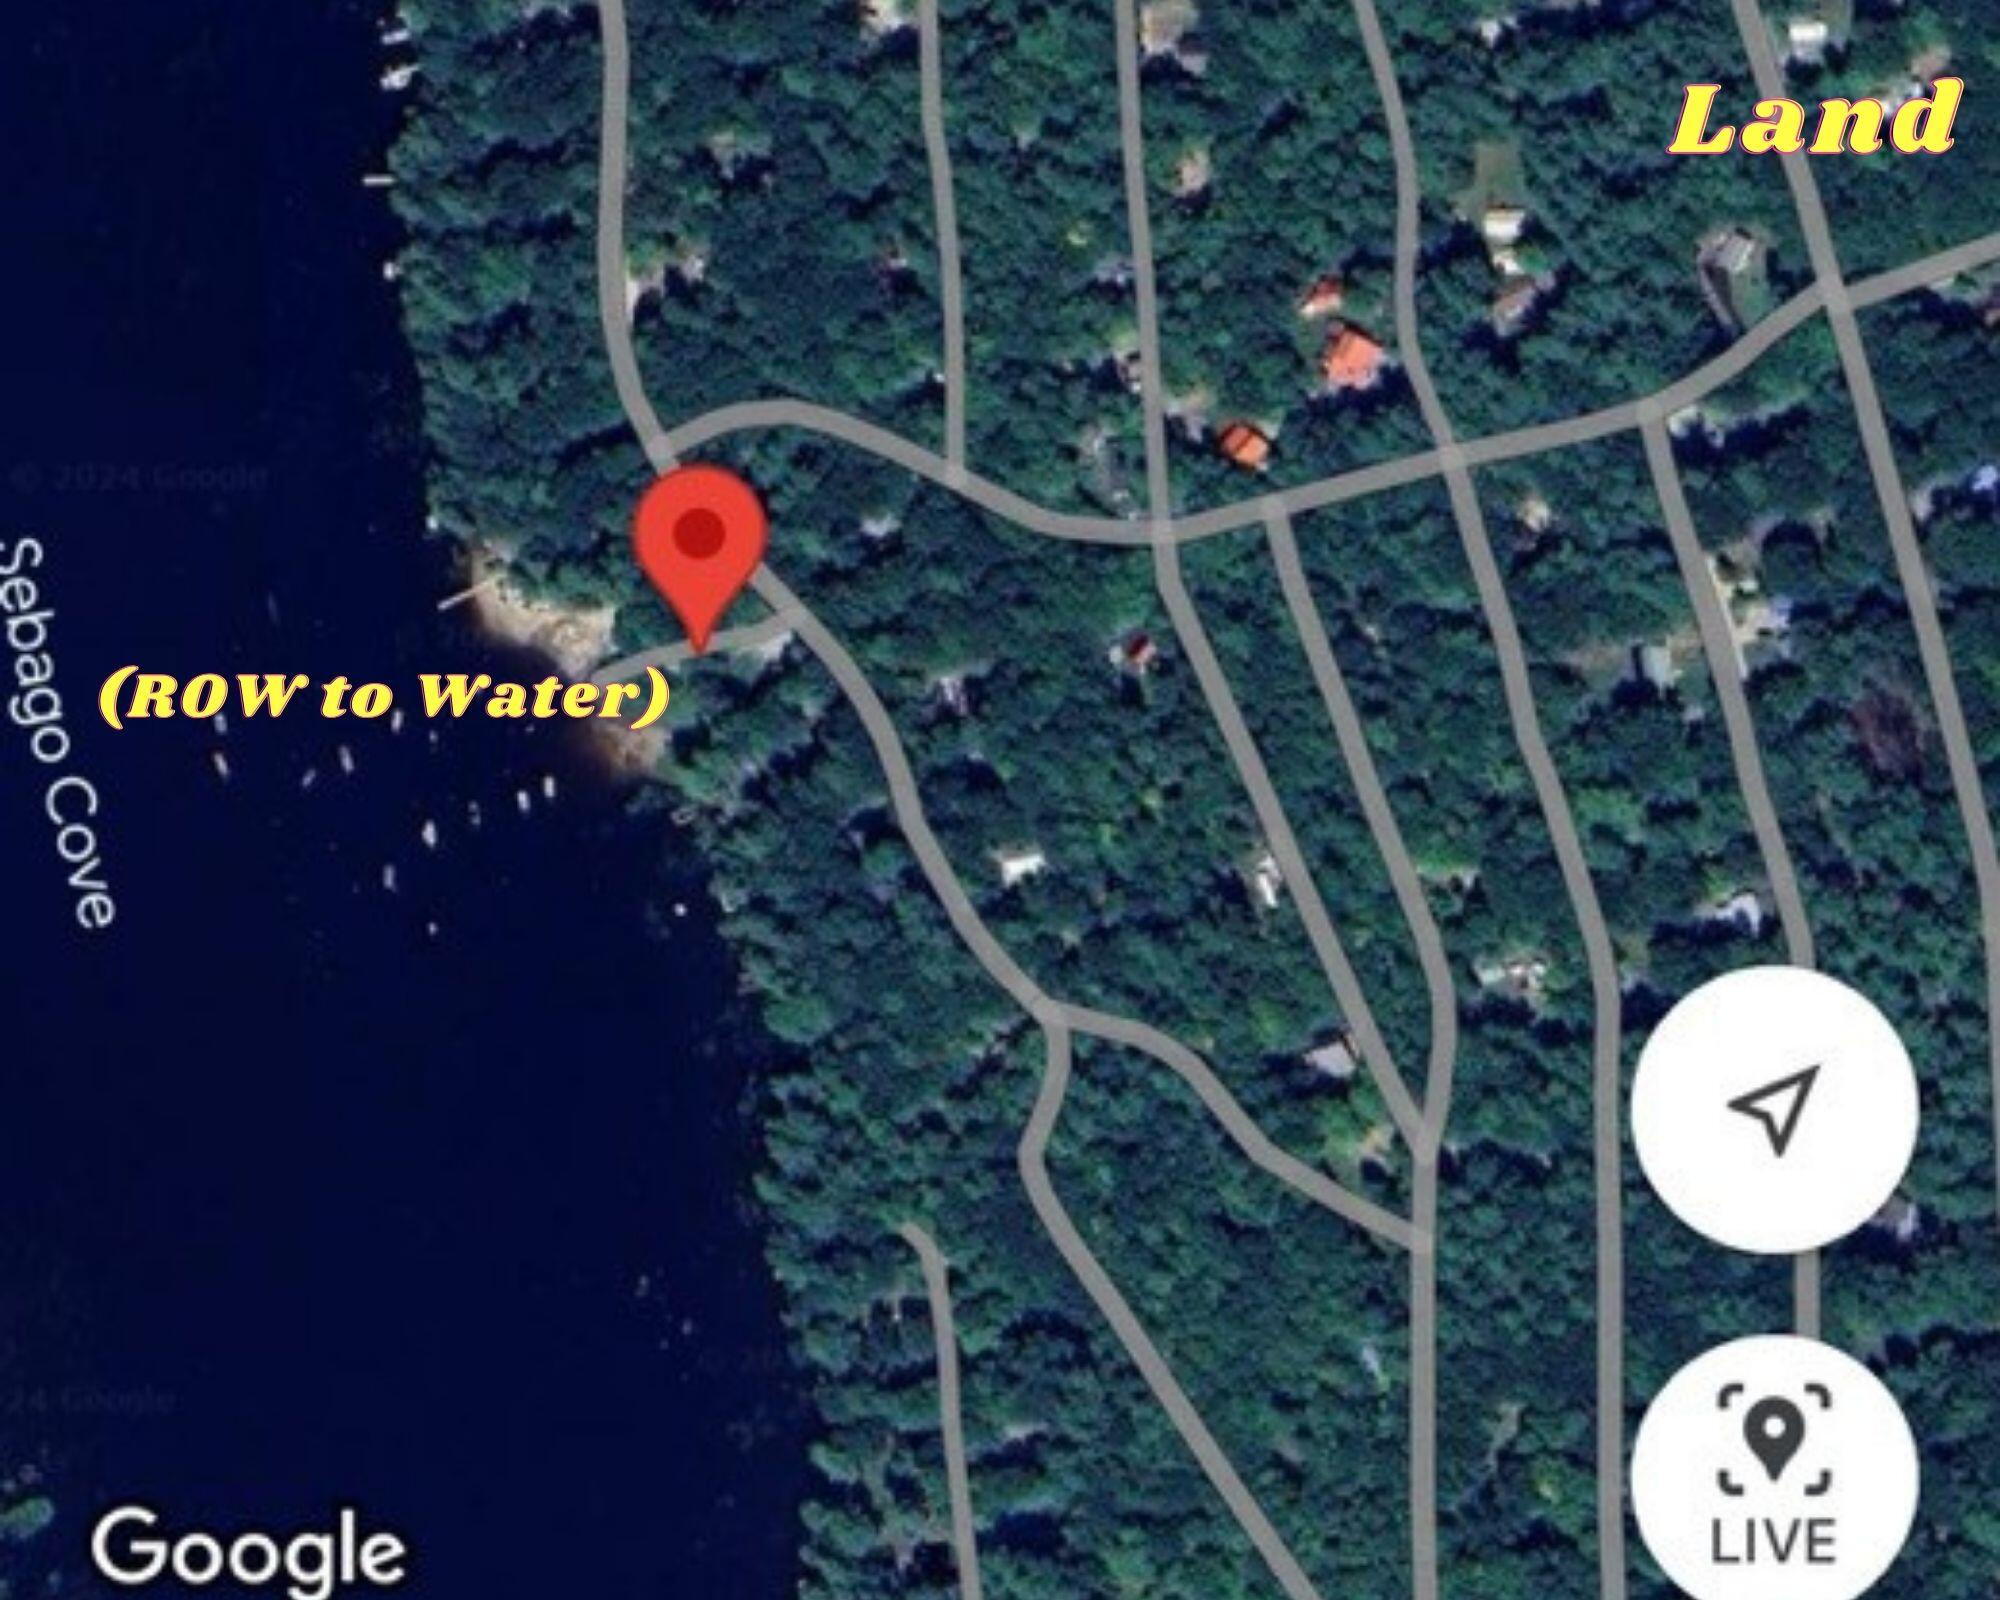 Google Pix showing Land and ROW